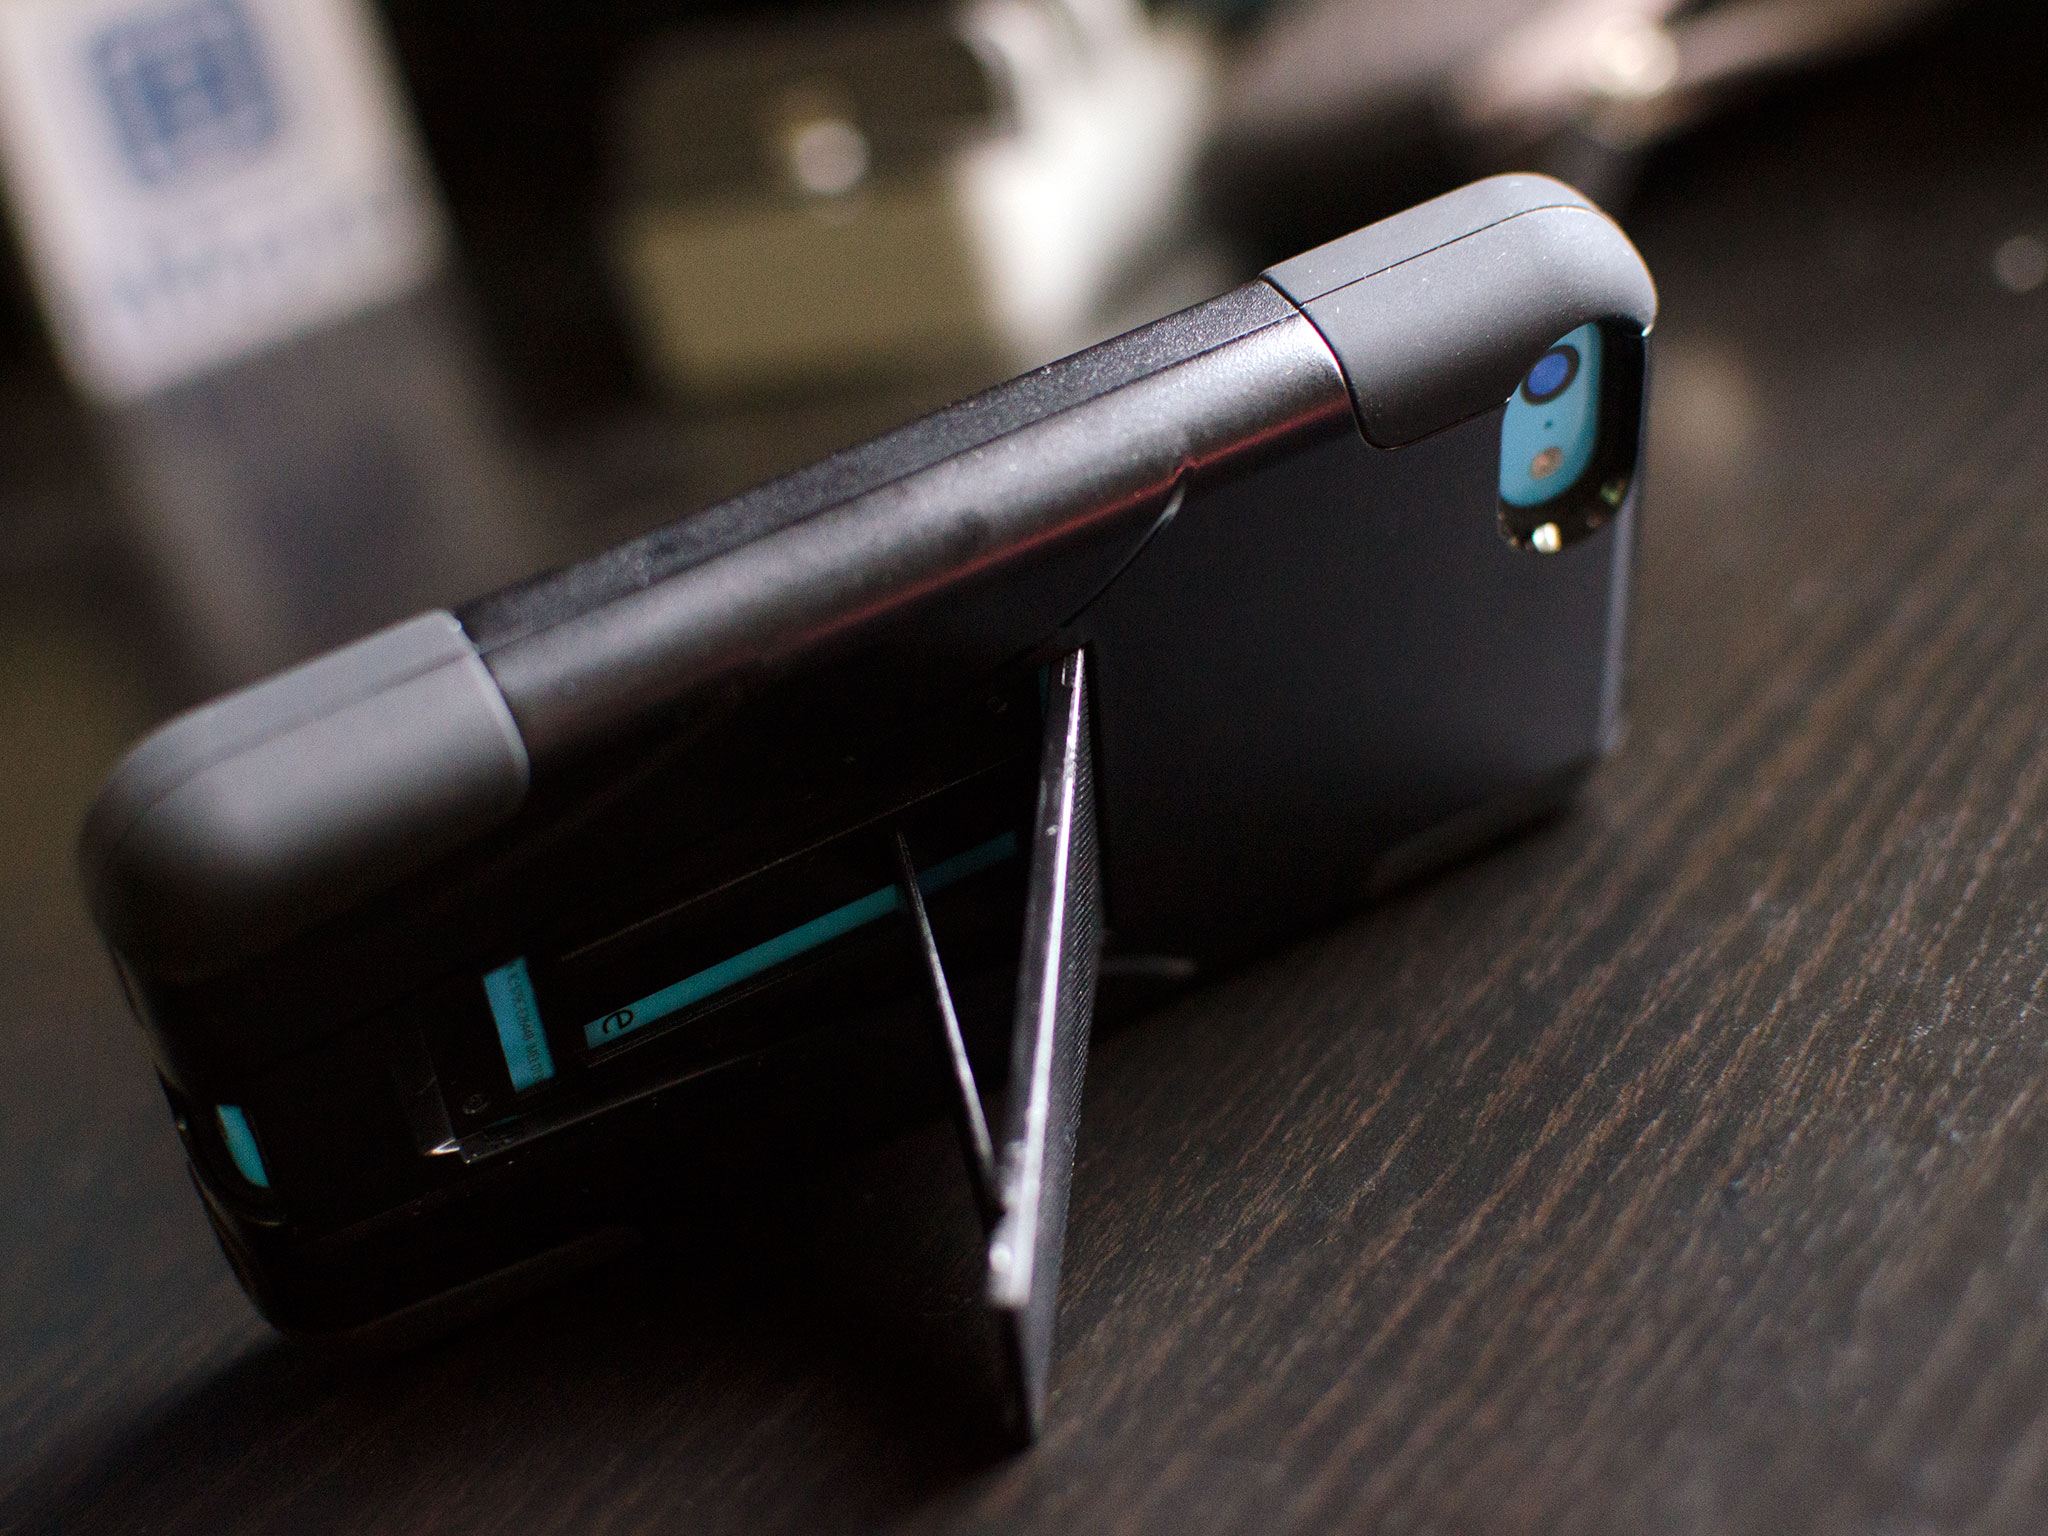 Amzer Double Layer Hybrid Case with Kickstand for iPhone 5c review